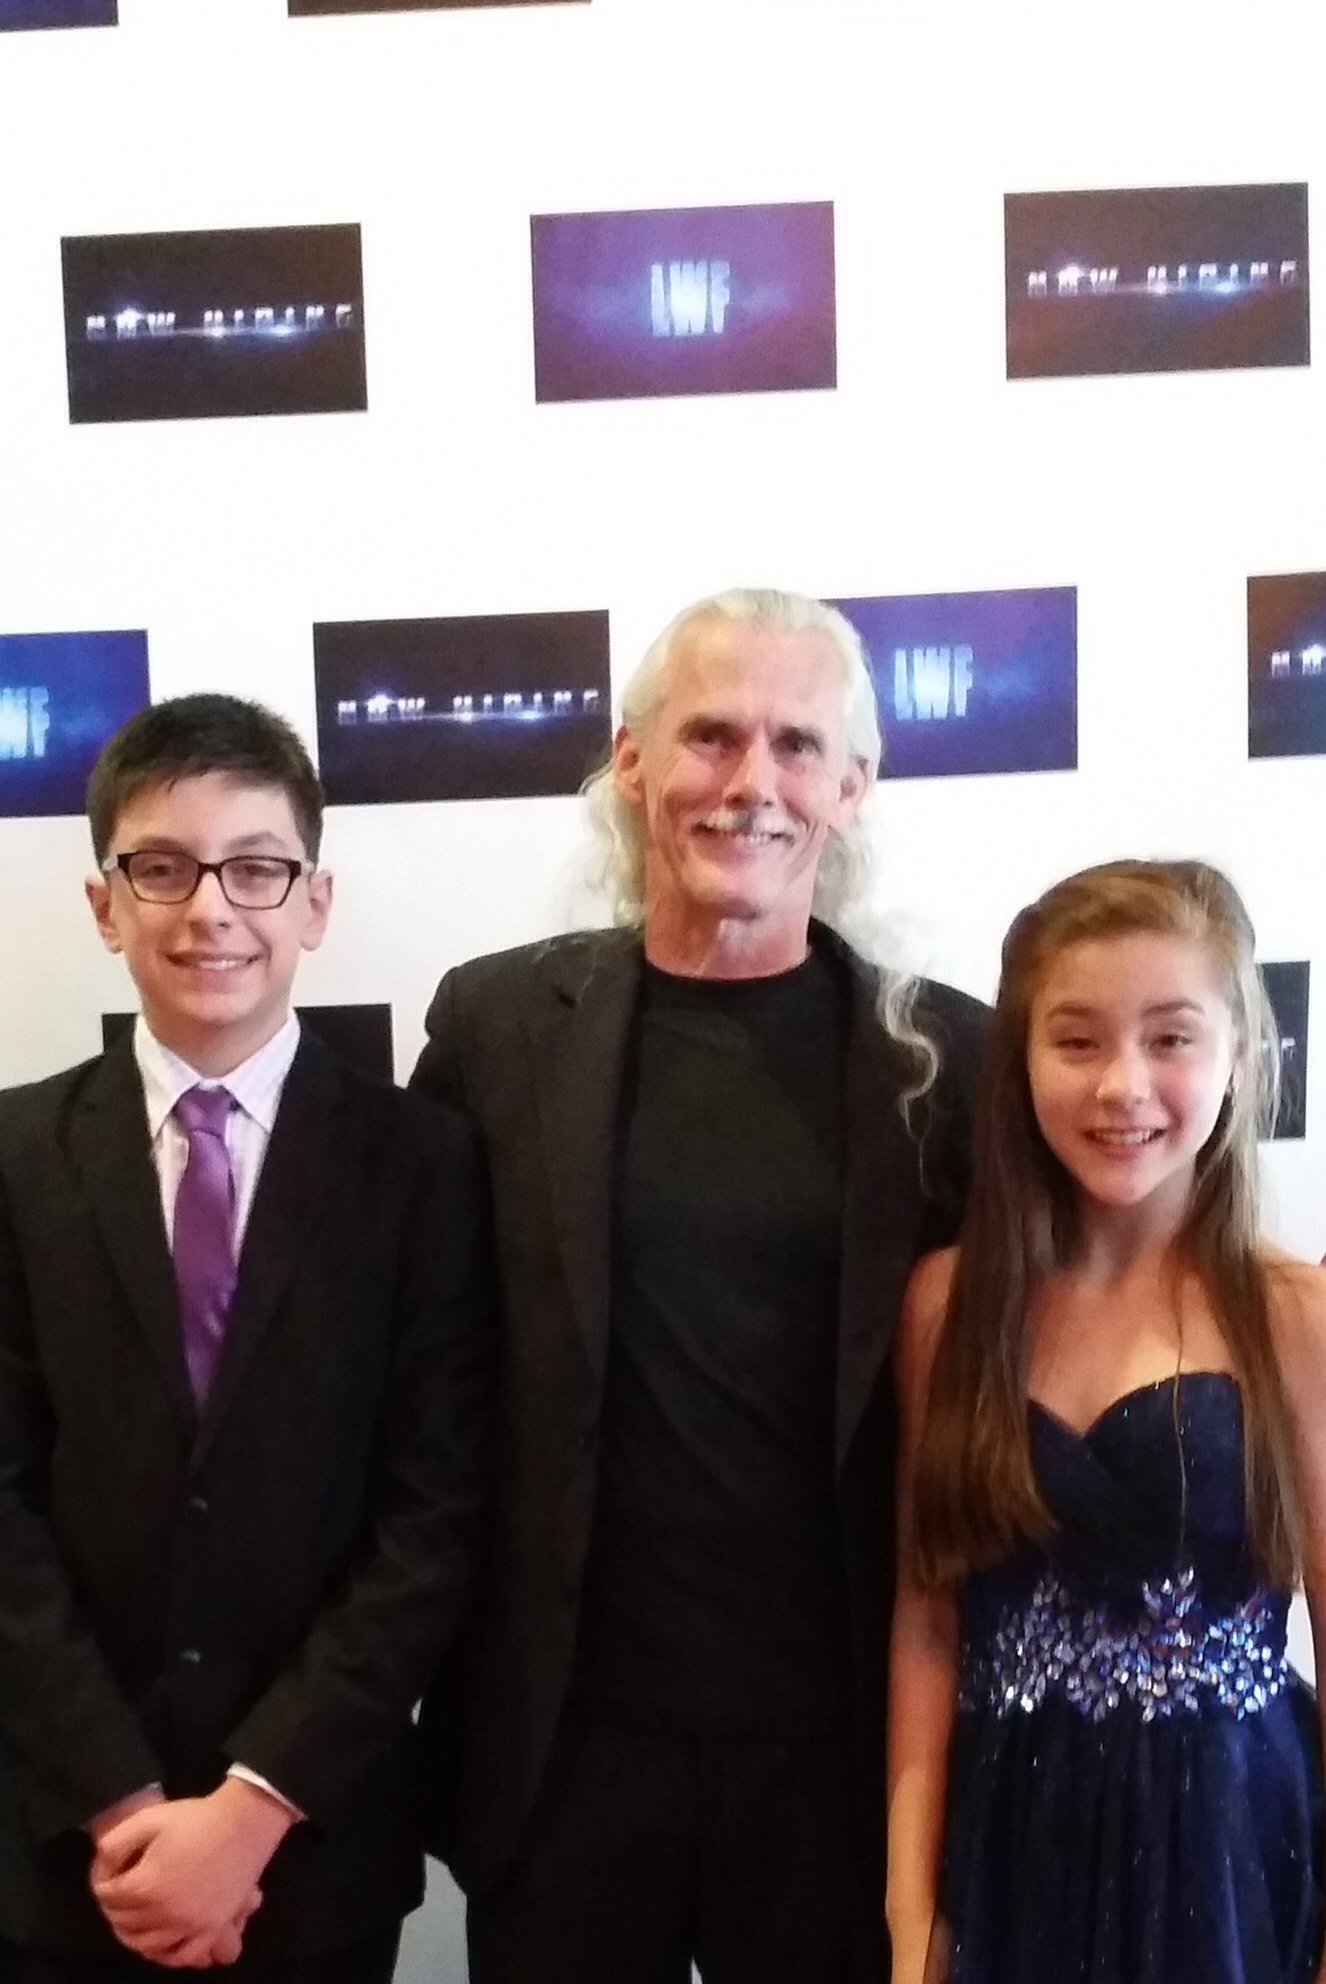 Evan Materne, Camden Toy, and Claire Tablizo at the Now Hiring Movie premiere in San Antonio, Tx